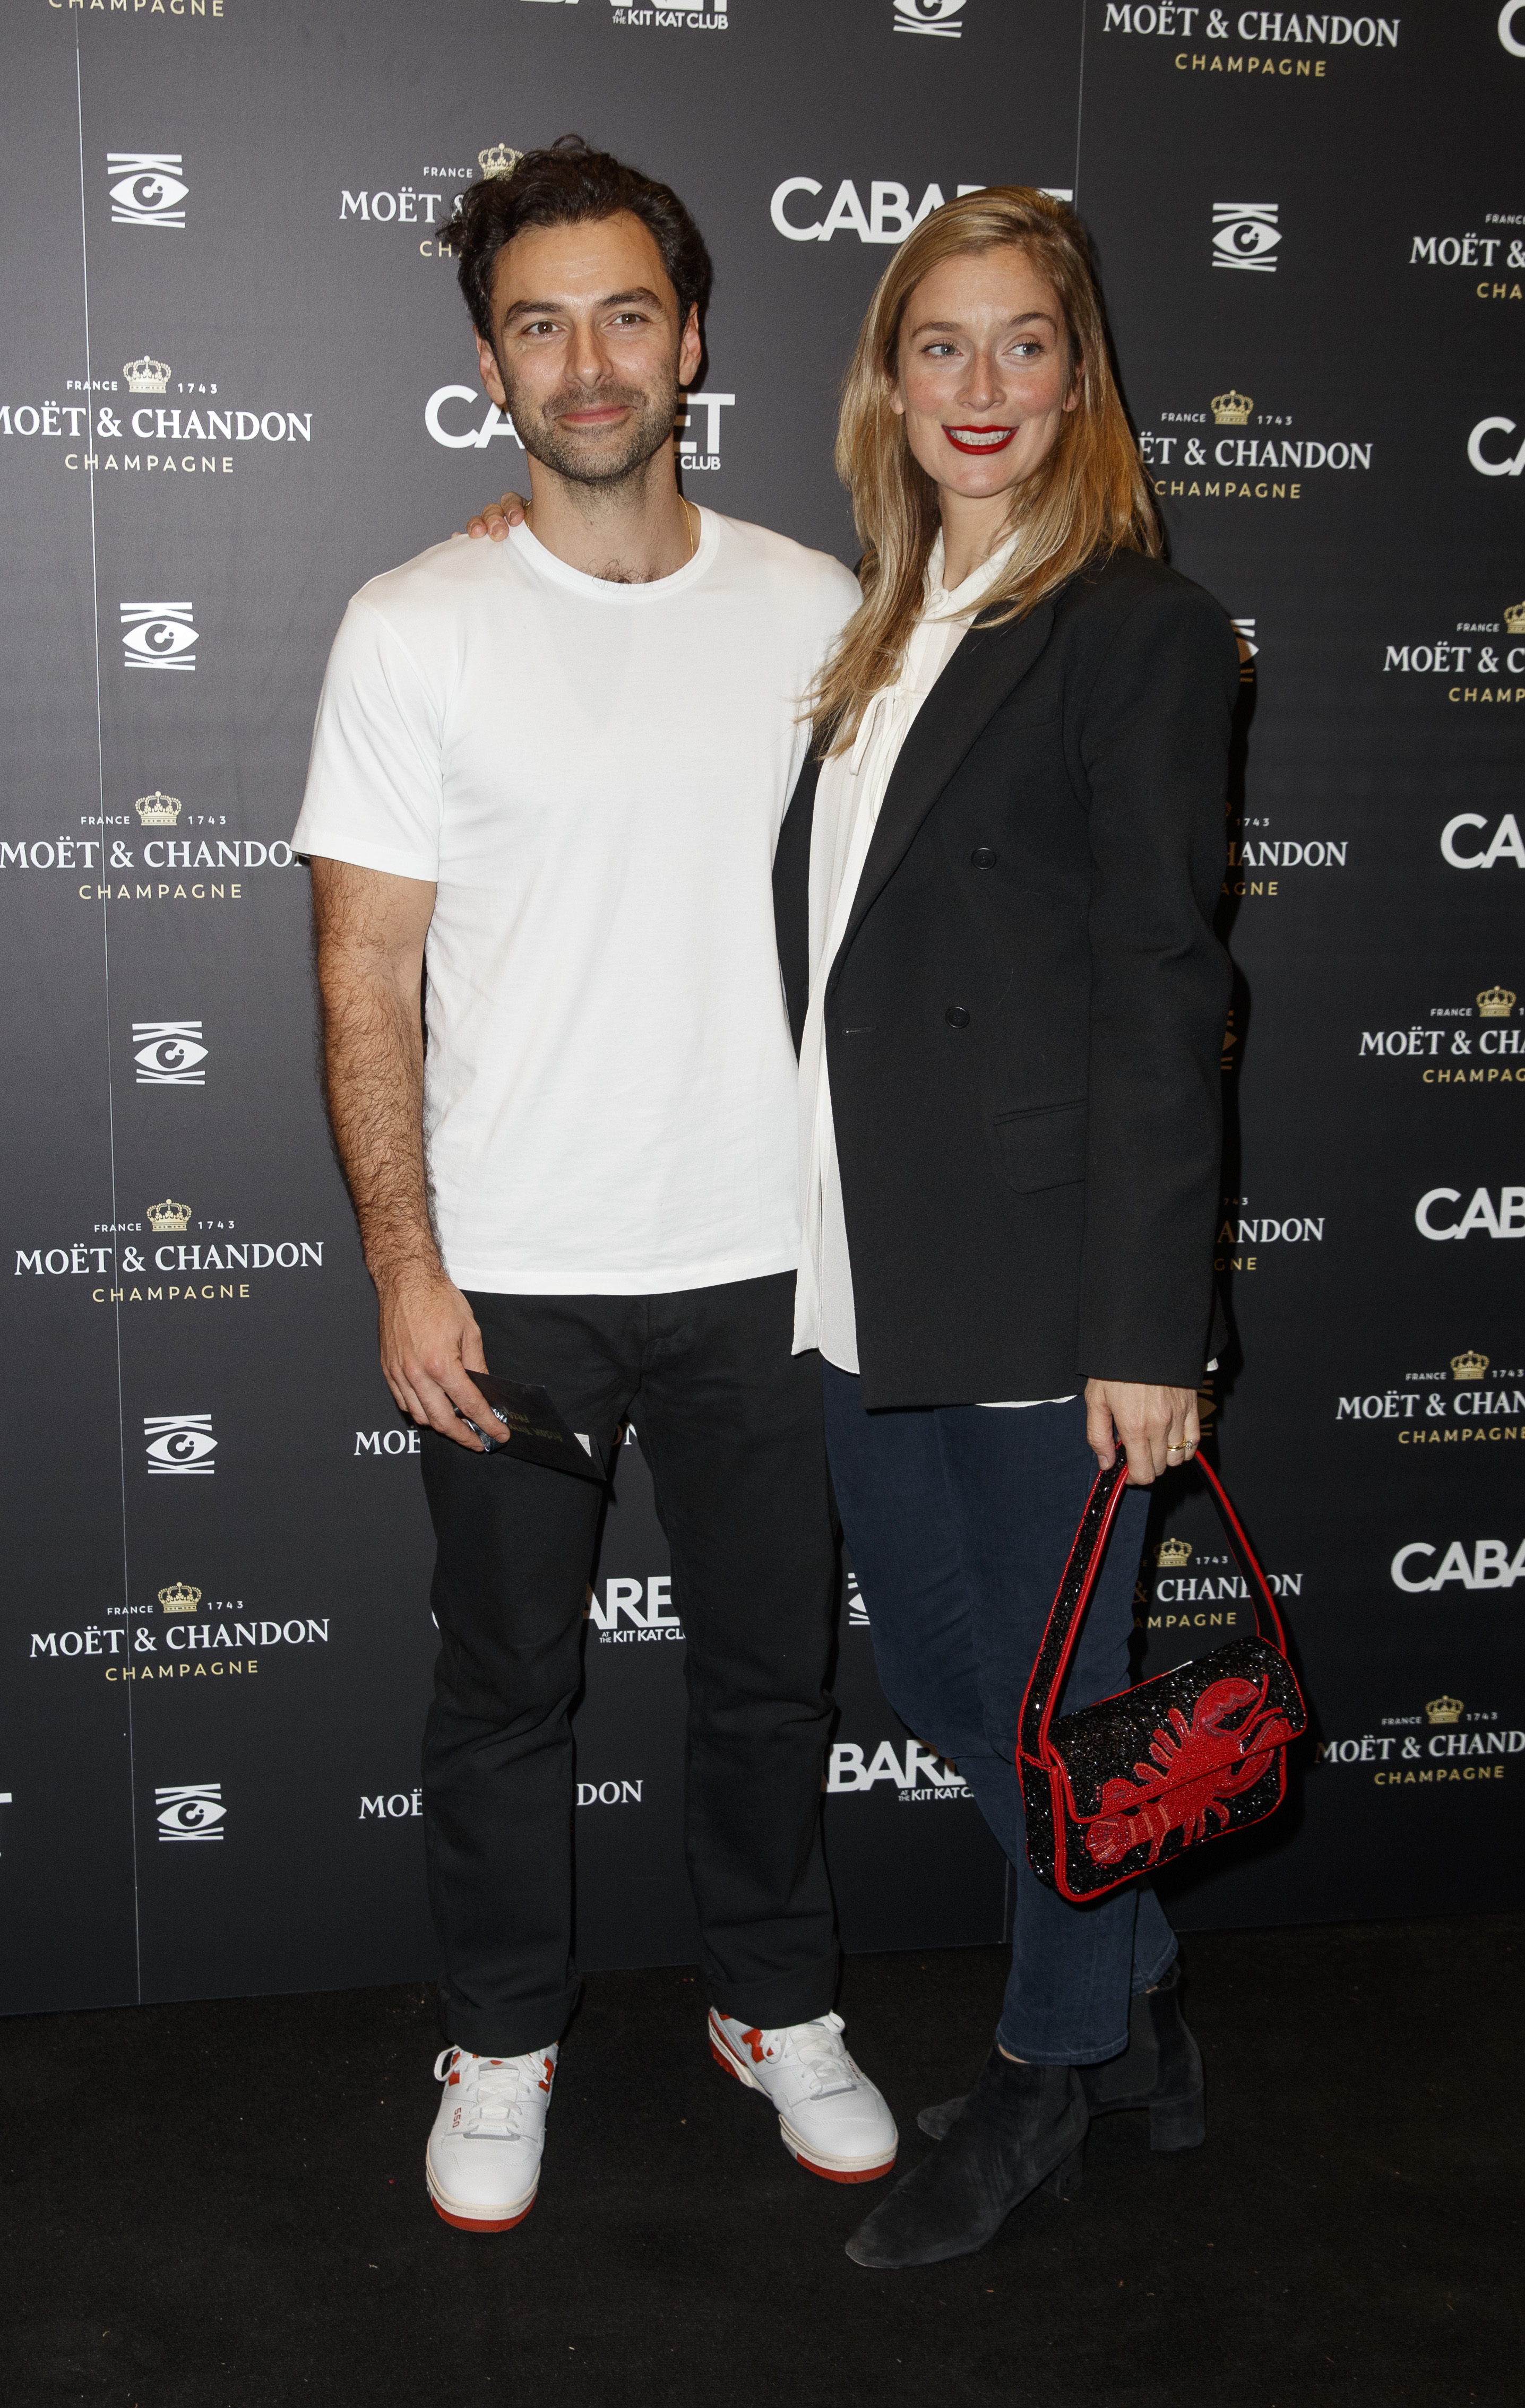 Aidan Turner and Caitlin Fitzgerald attend the Gala Night performance of "Cabaret at the Kit Kat Club" on October 27, 2022 in London, England | Source: Getty Images